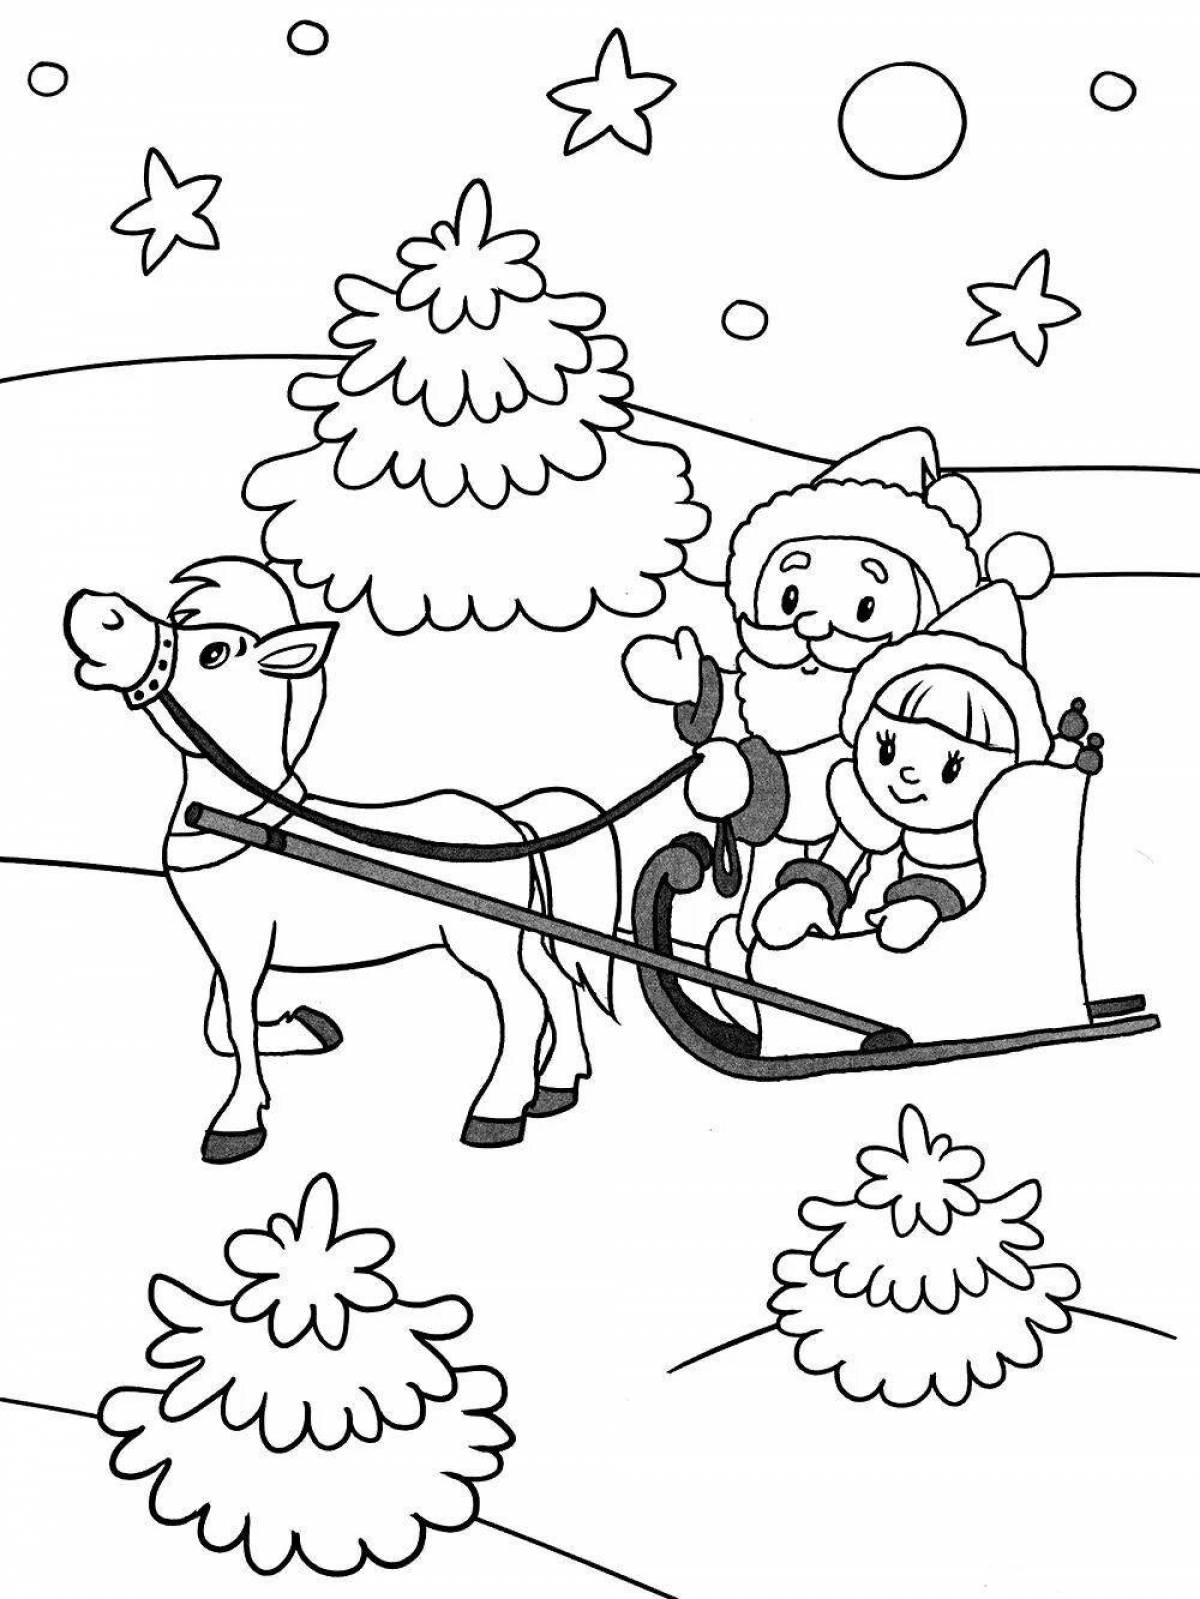 Dreamy 5 year old winter coloring book